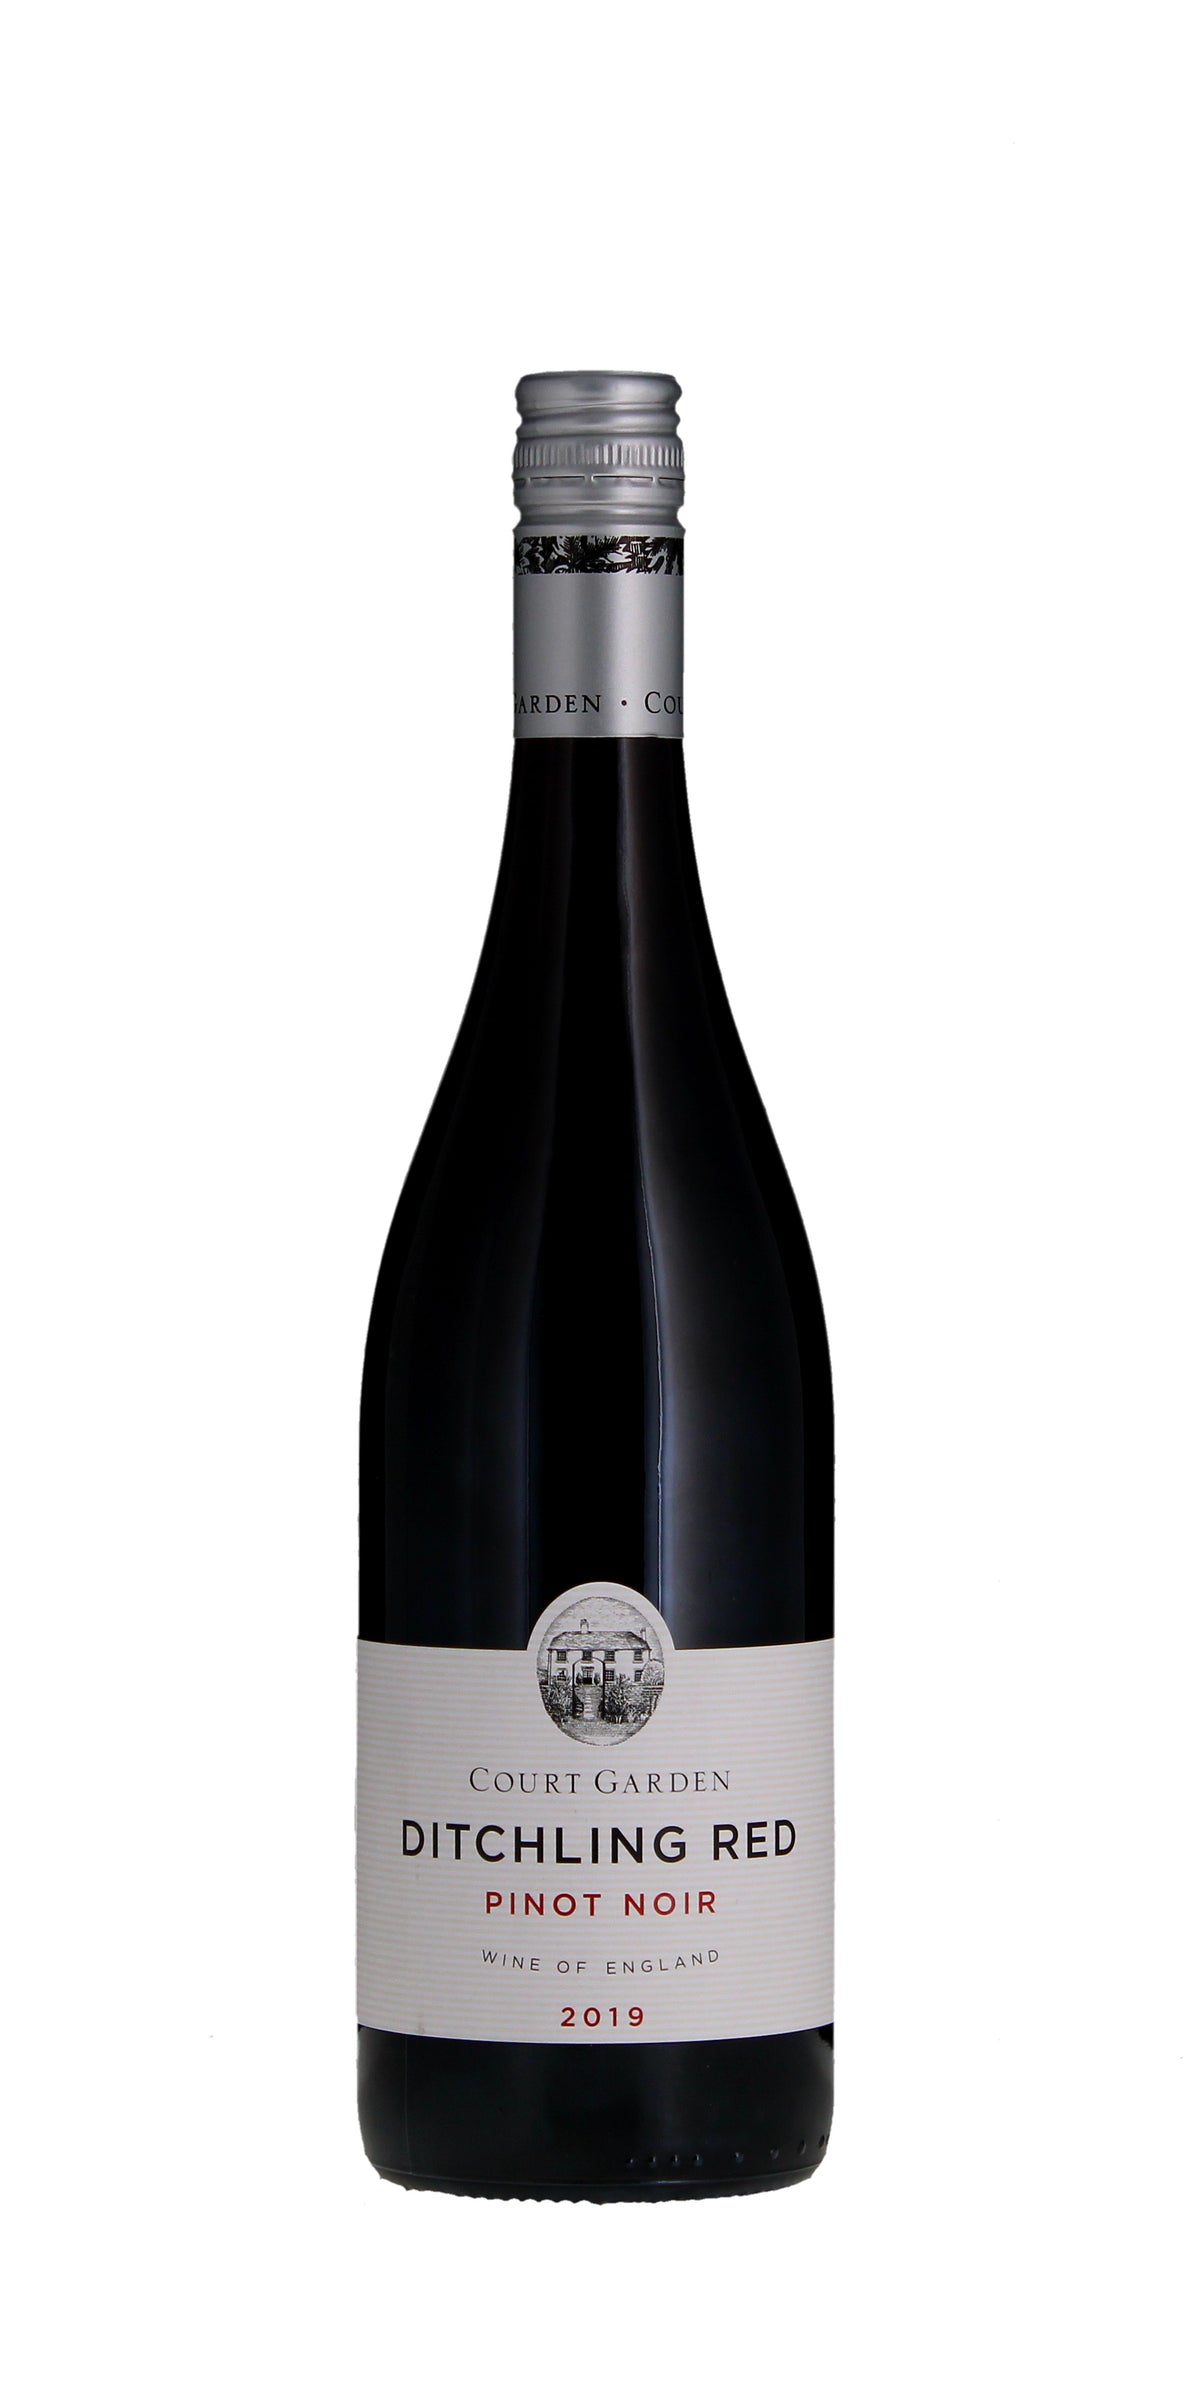 Ditchling Red Pinot Noir Vintage Court Garden England 2019